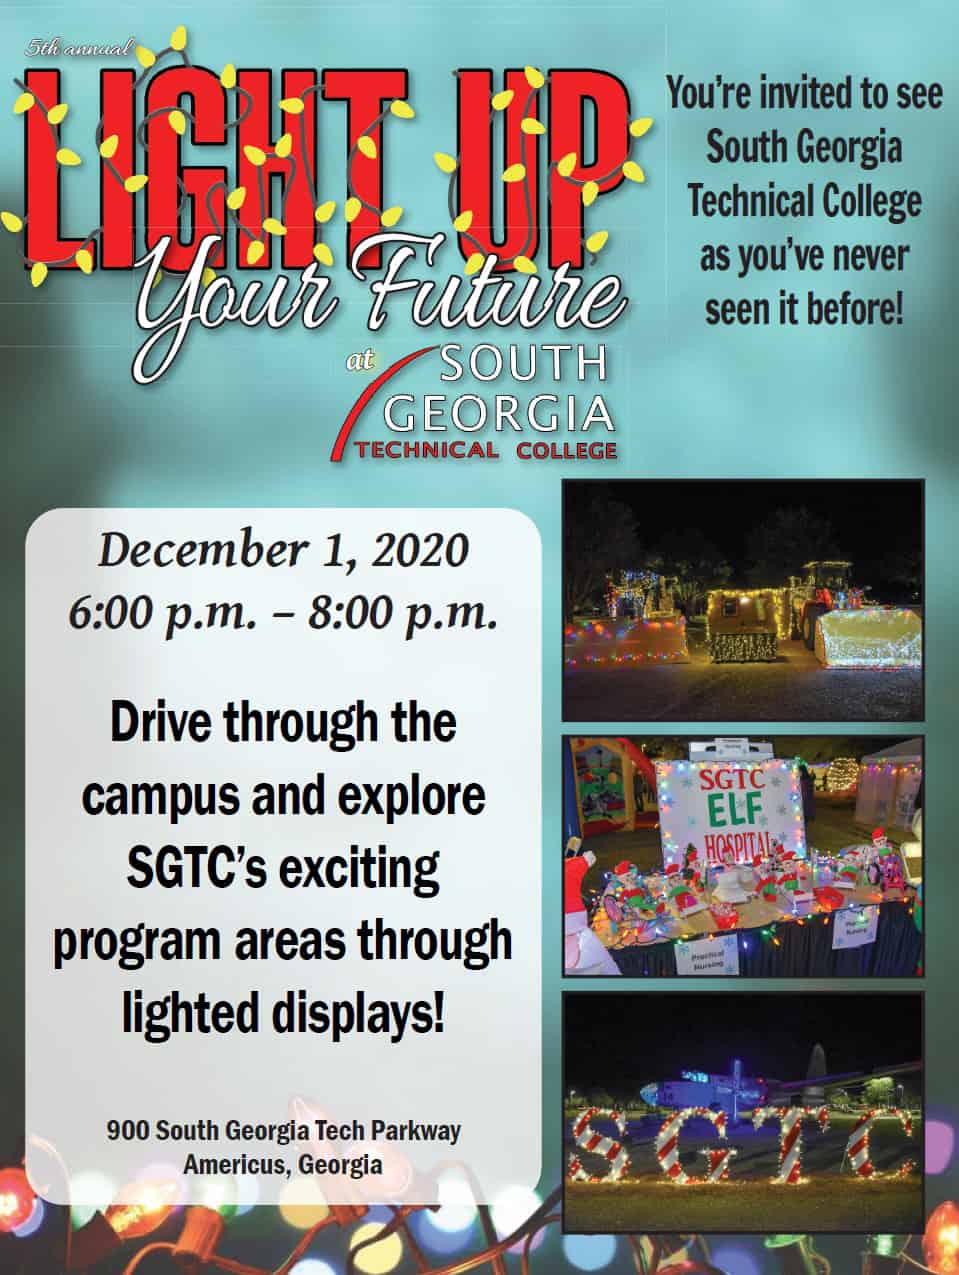 Everyone is invited to the FREE 5th annual “Light Up Your Future” Event at South Georgia Technical College on Tuesday, December 1st from 6 p.m. to 8 p.m.